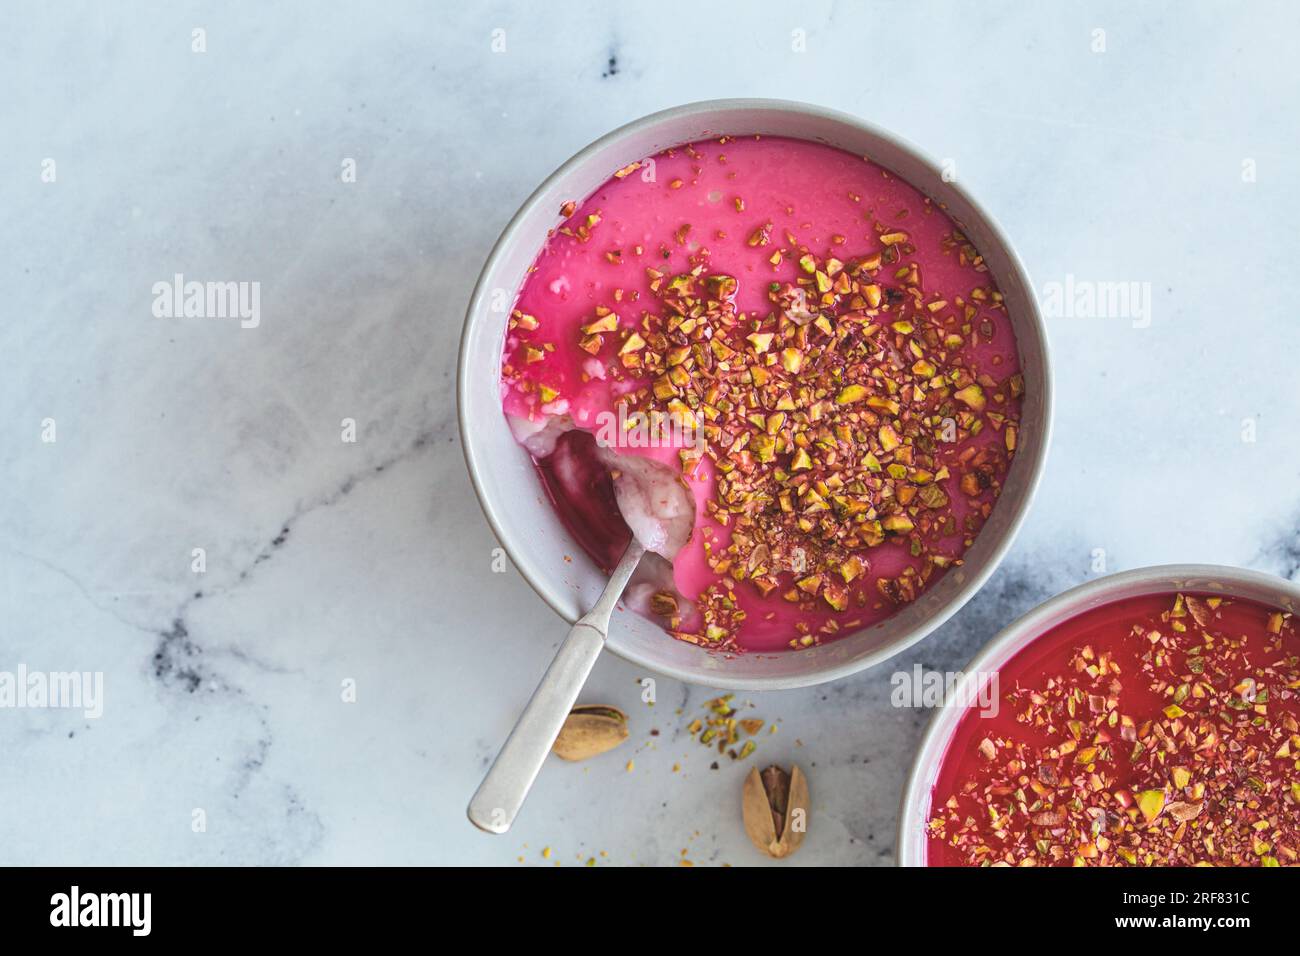 Malabi traditional Arabic dessert. Milk pudding with pink syrup and pistachio in gray bowl, top view on white marble background. Stock Photo